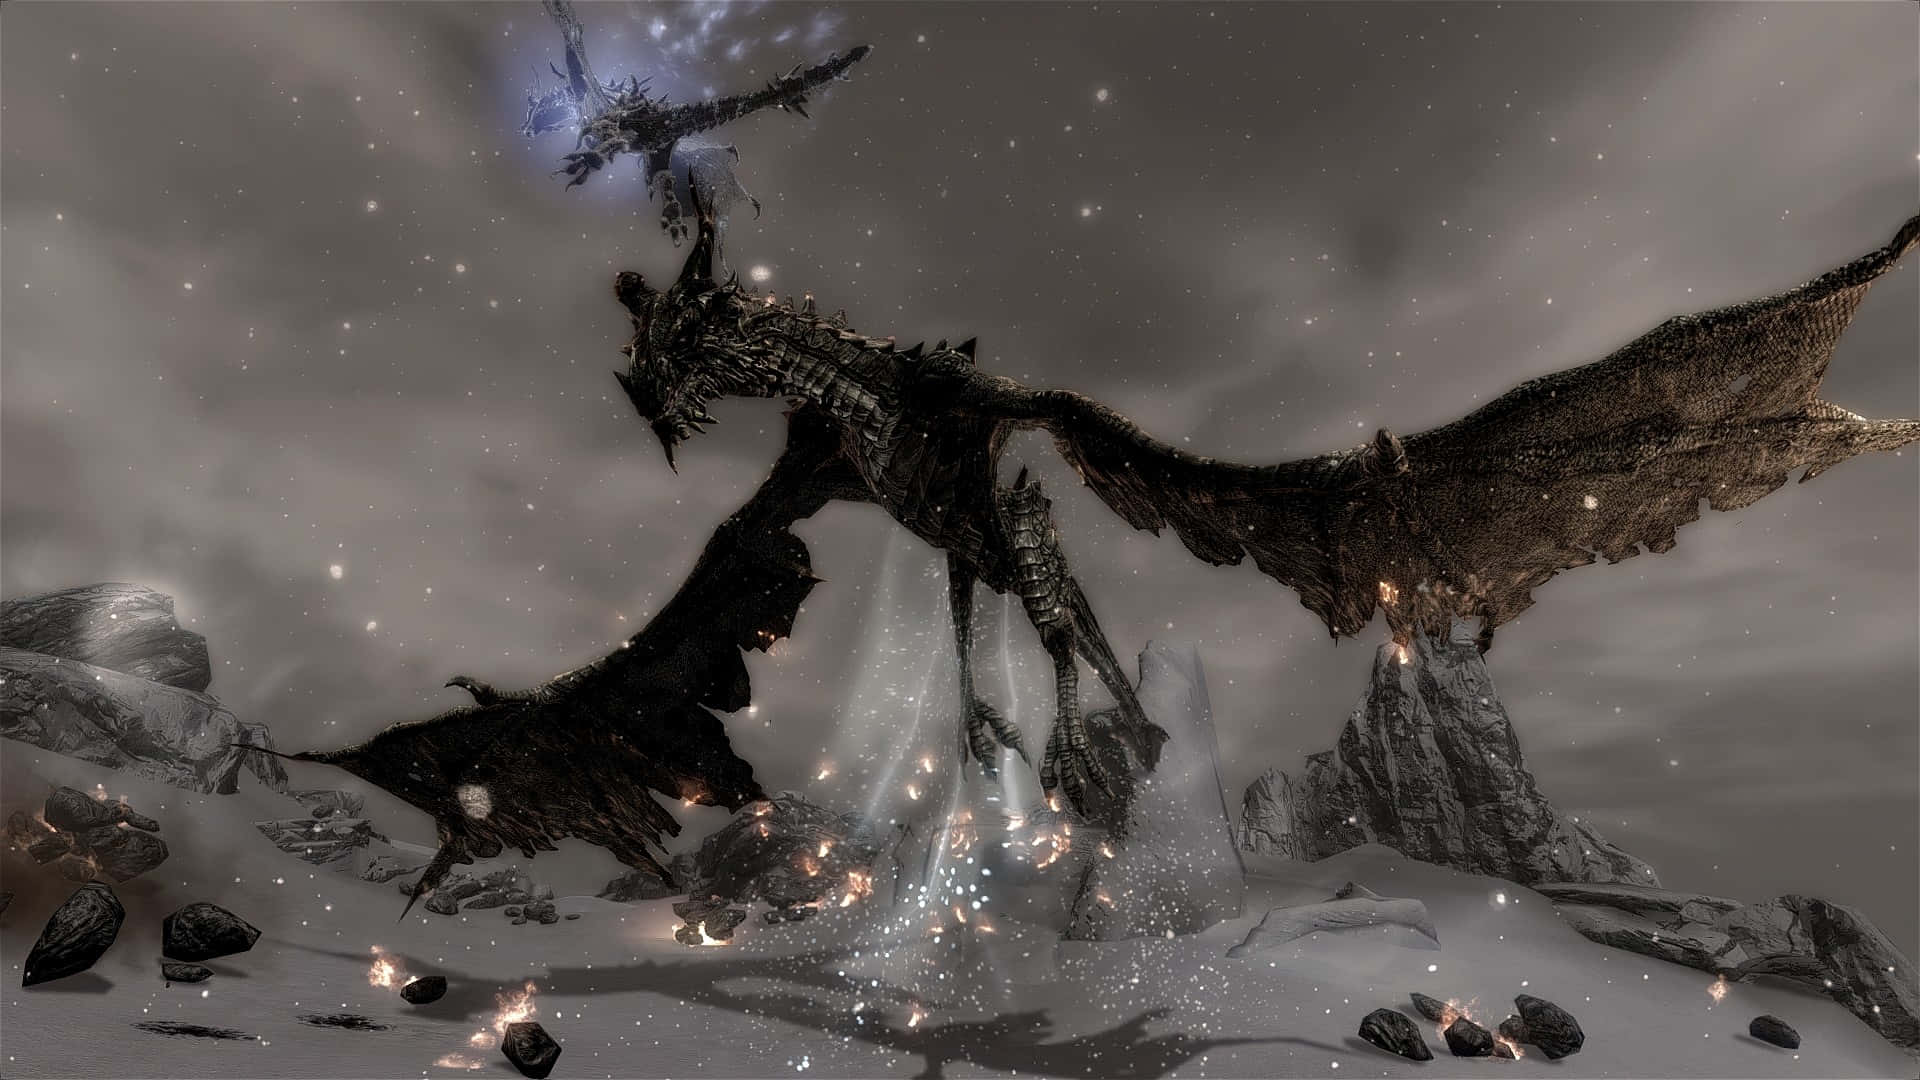 Paarthurnax, the Wise Dragon of Skyrim Wallpaper